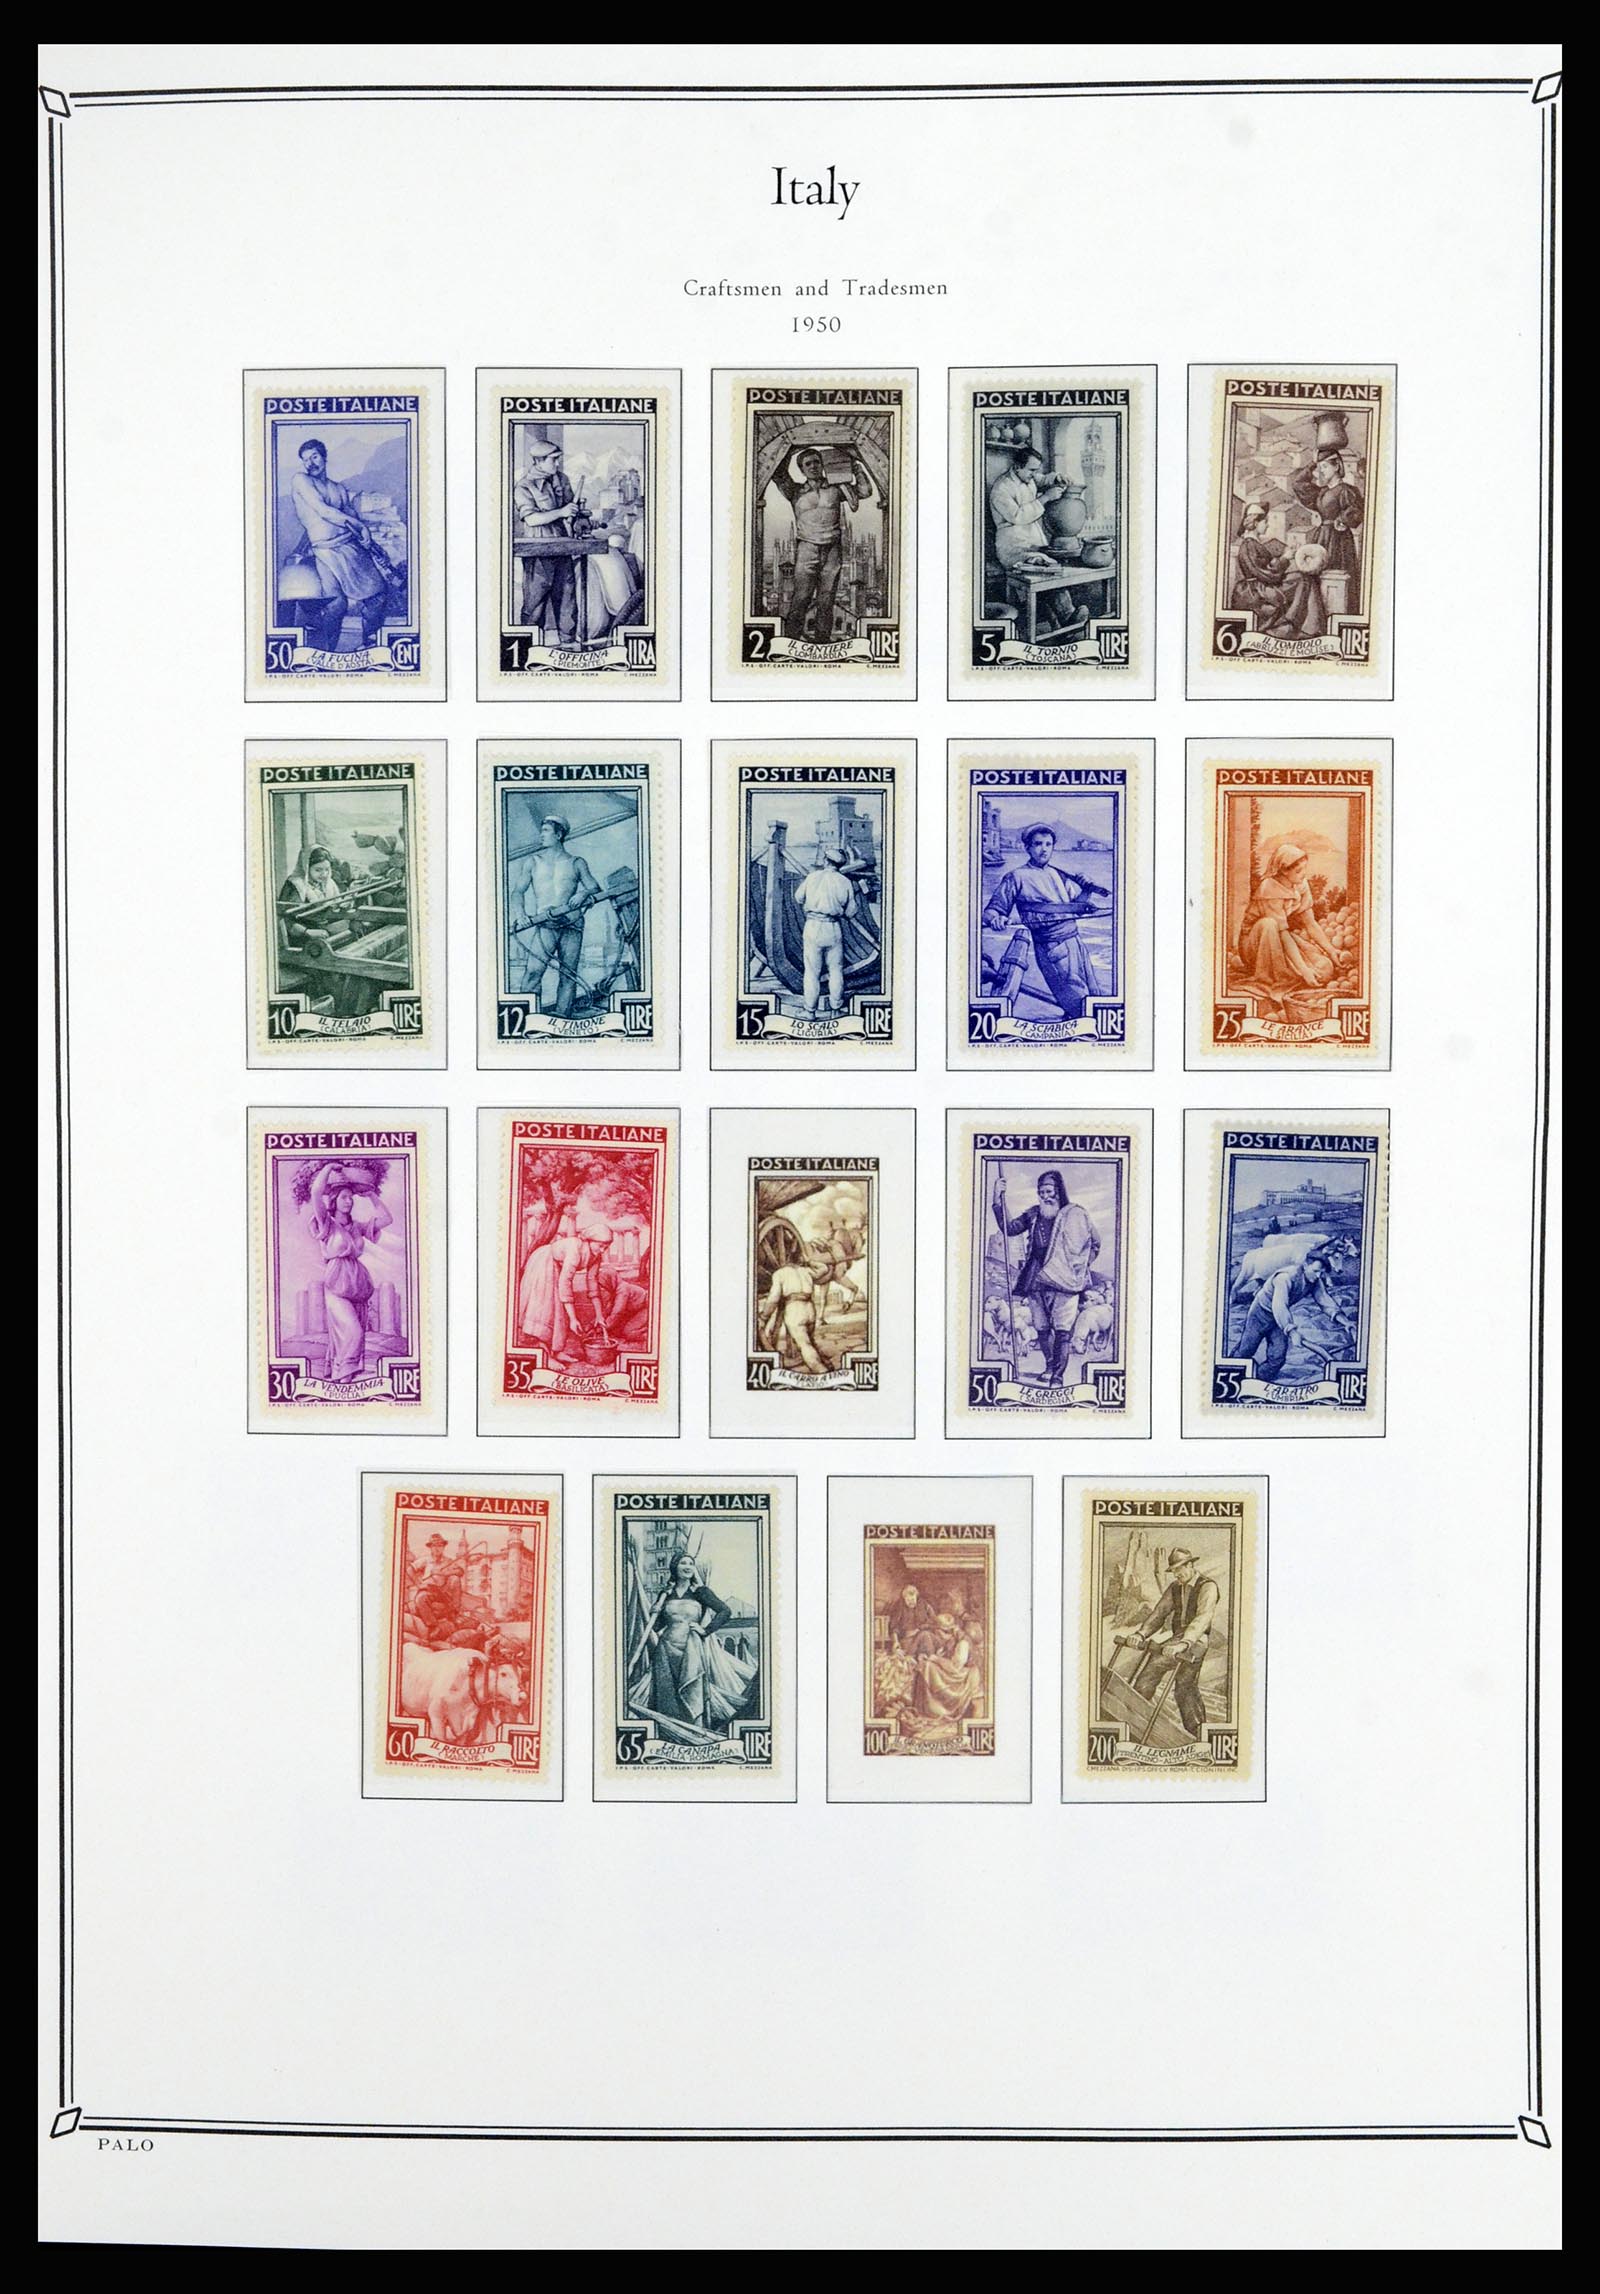 36786 037 - Stamp collection 36786 Italy and Aegean Islands 1860-1990.